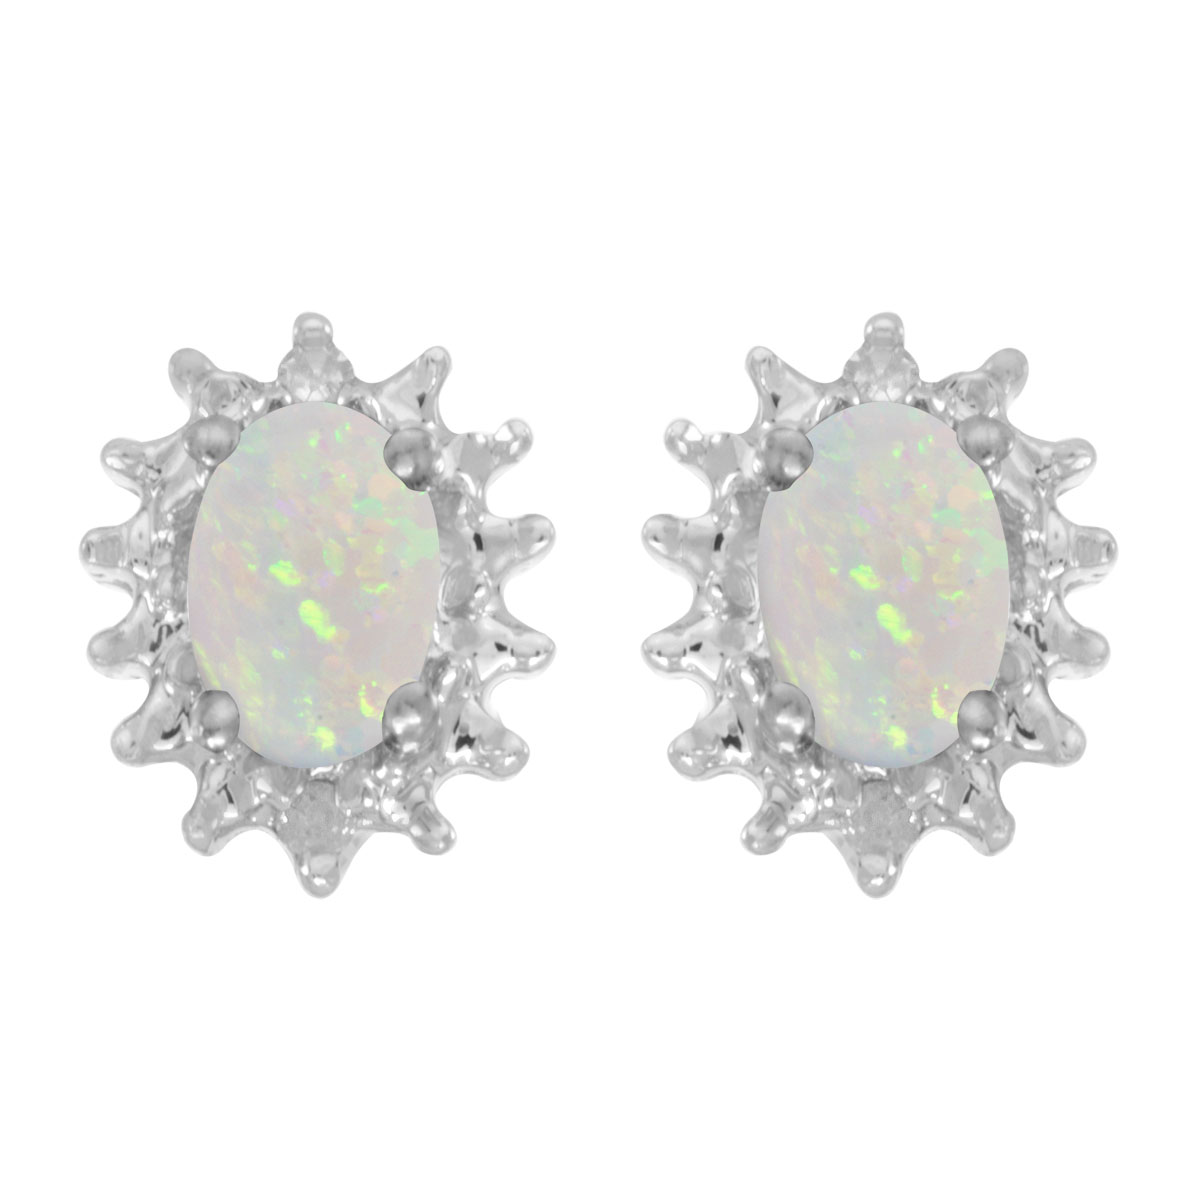 JCX2010: These 14k white gold oval opal and diamond earrings feature 6x4 mm genuine natural opals with a 0.38 ct total weight and .04 ct diamonds.